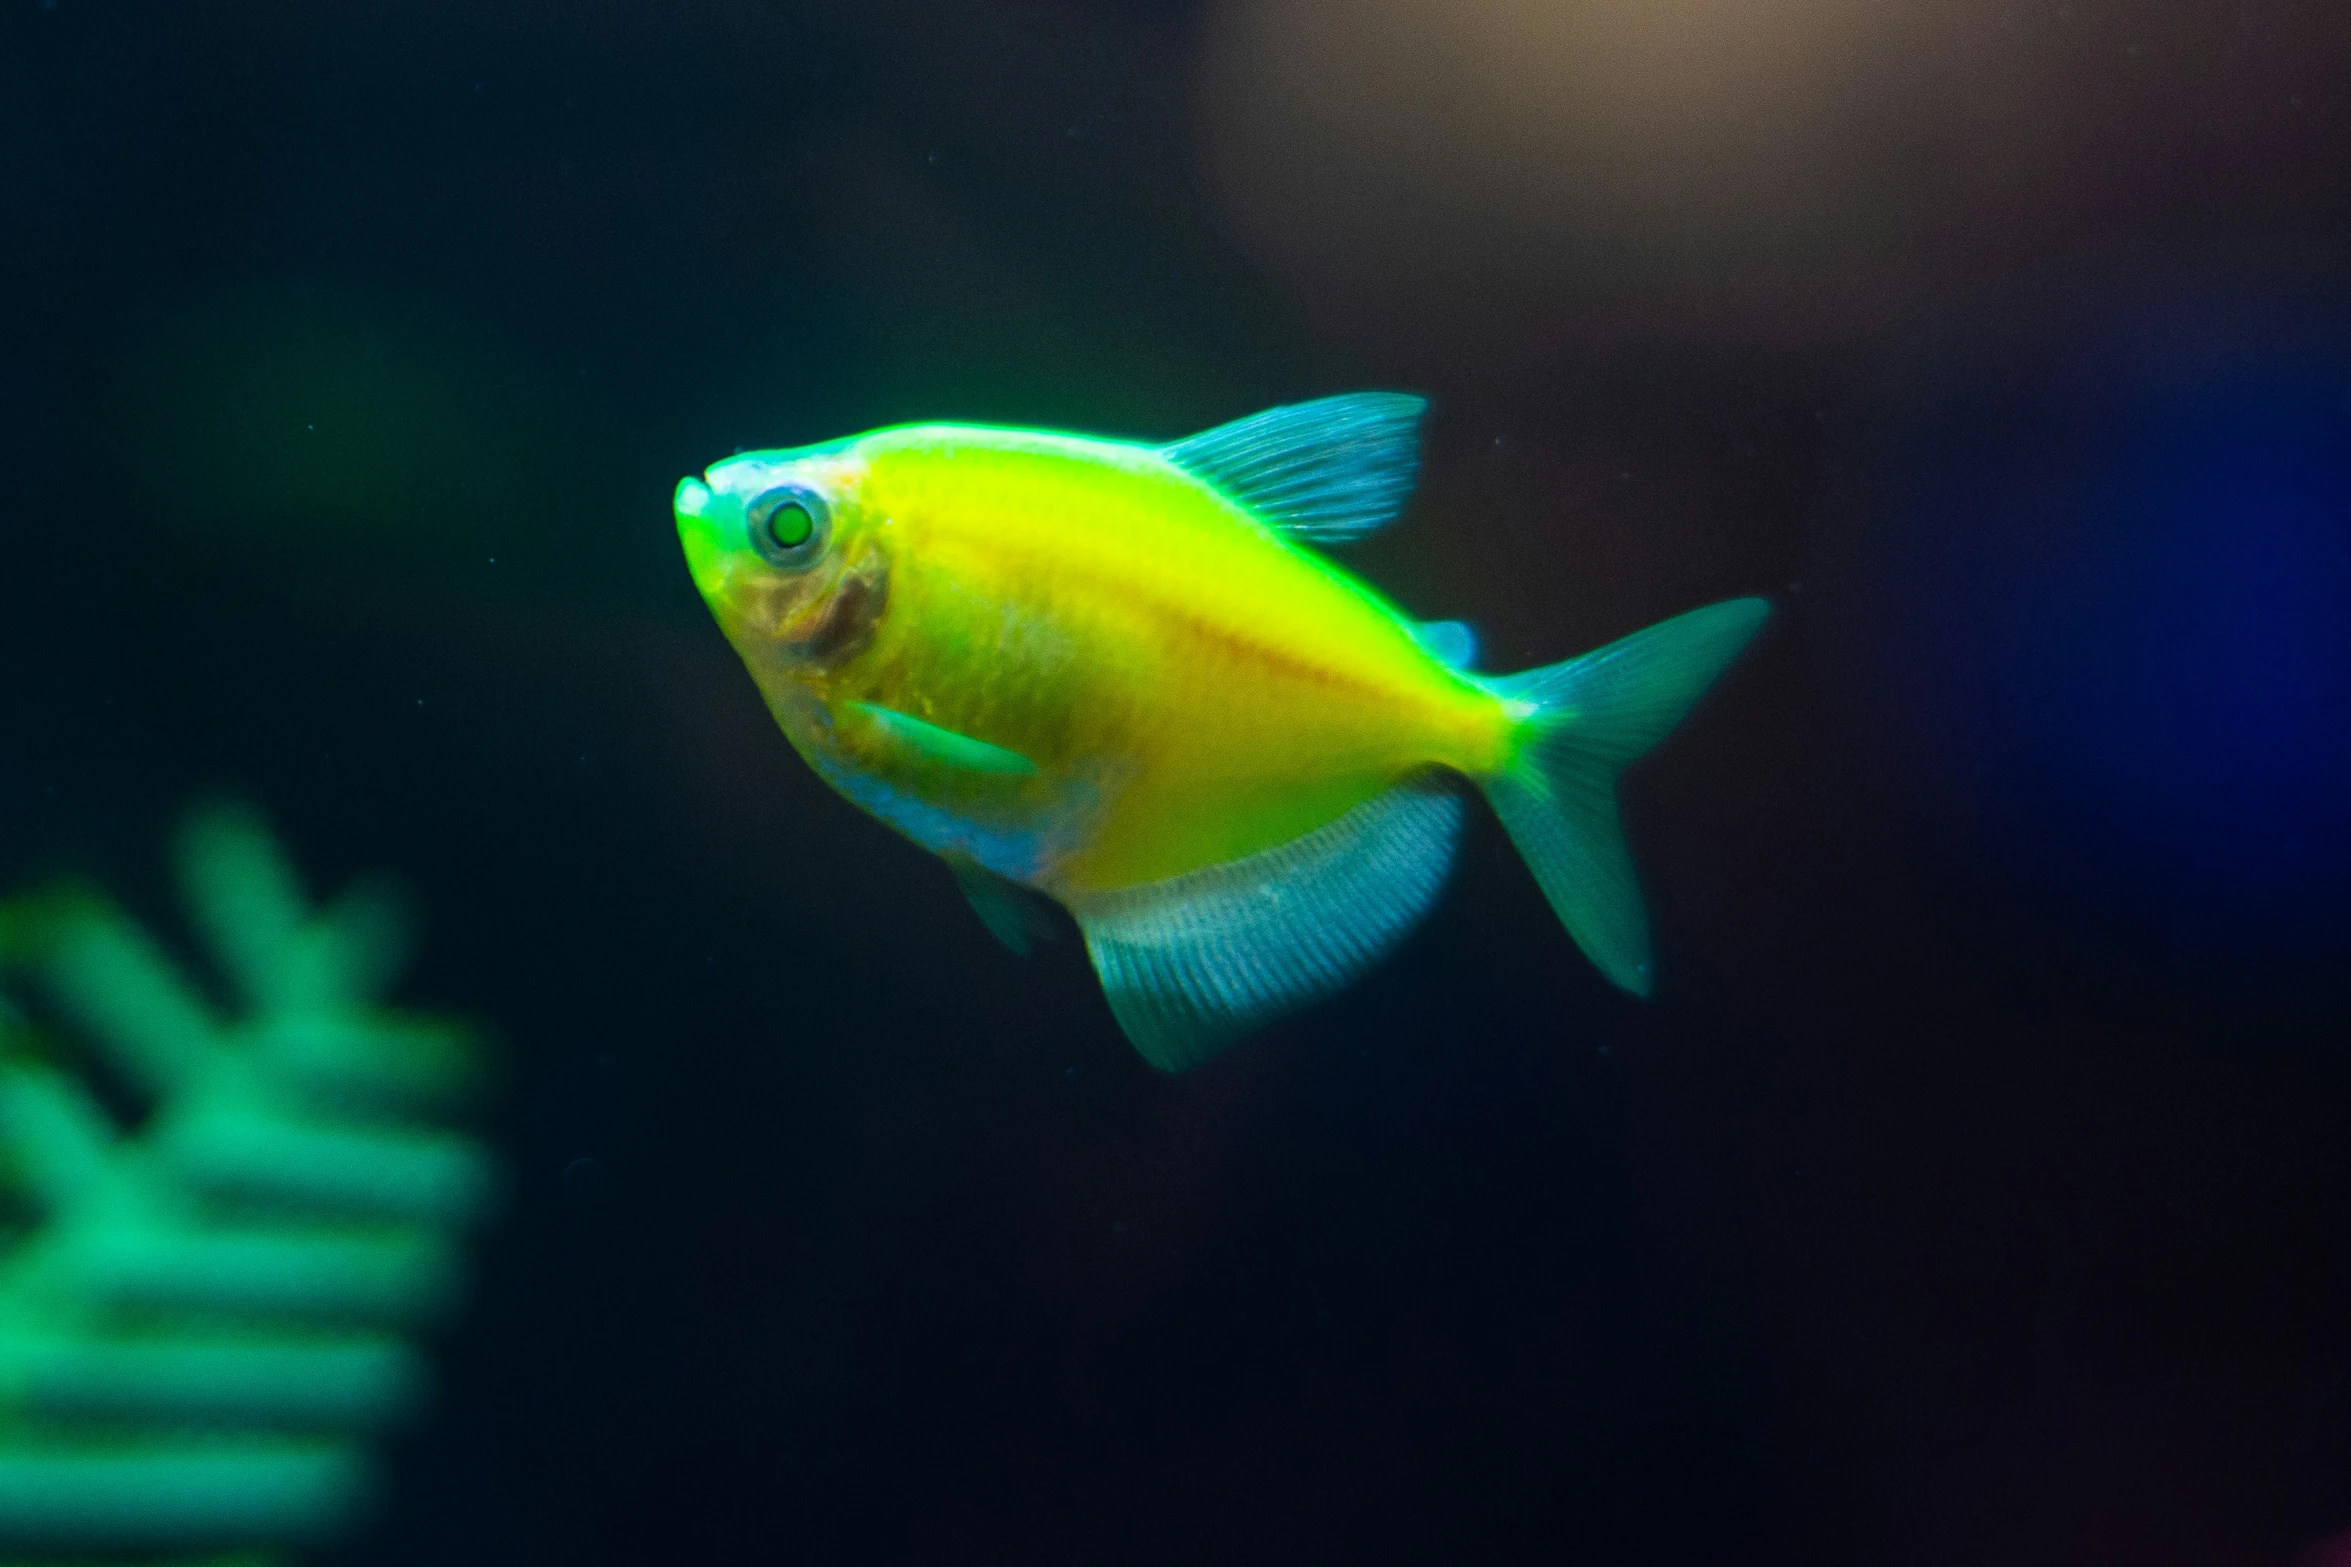 a bright yellow fish with black and blue walls